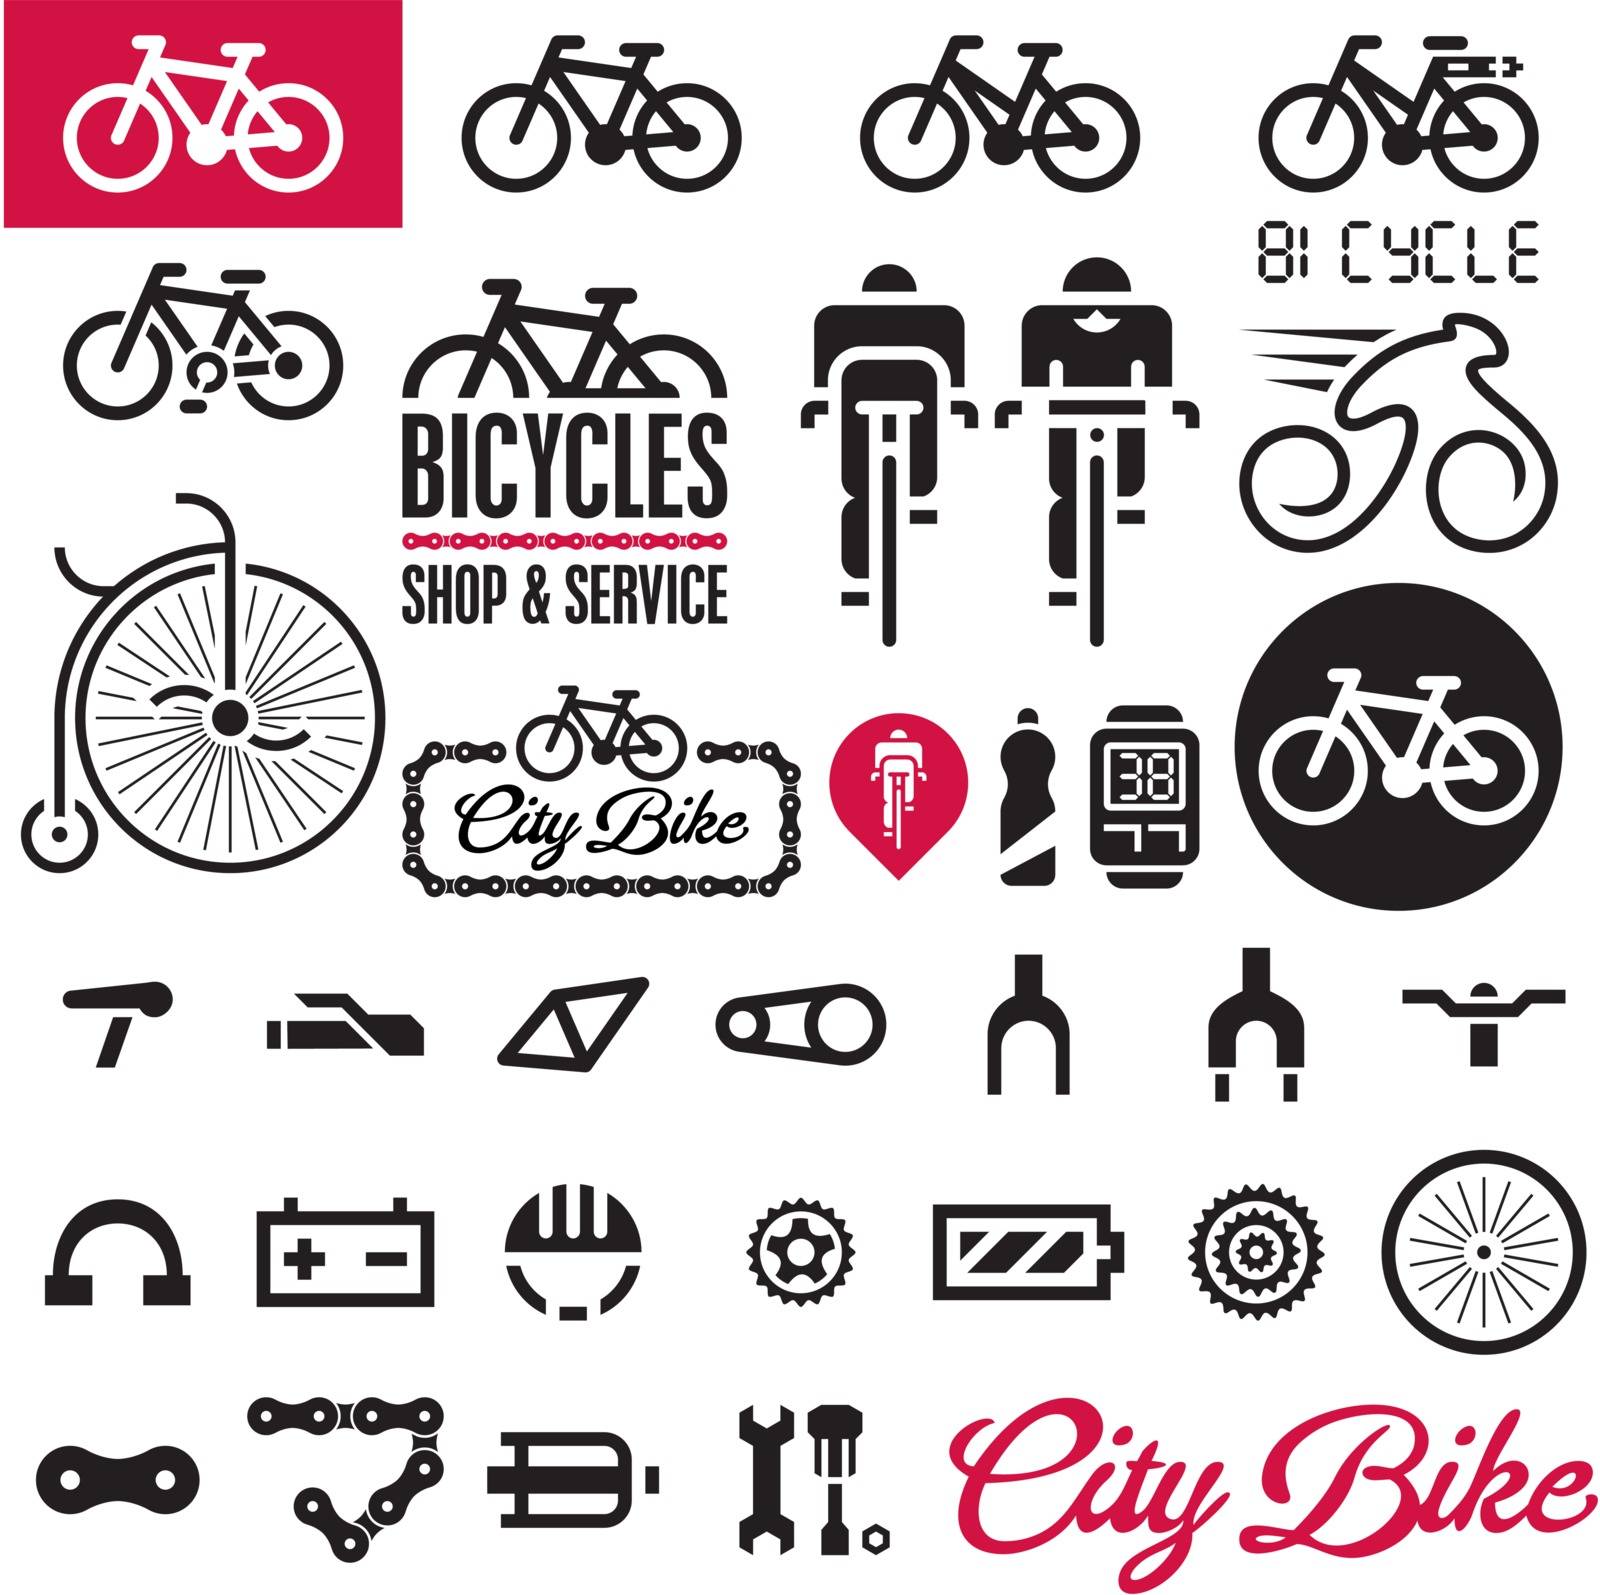 Vector illustration with bicycle elements.